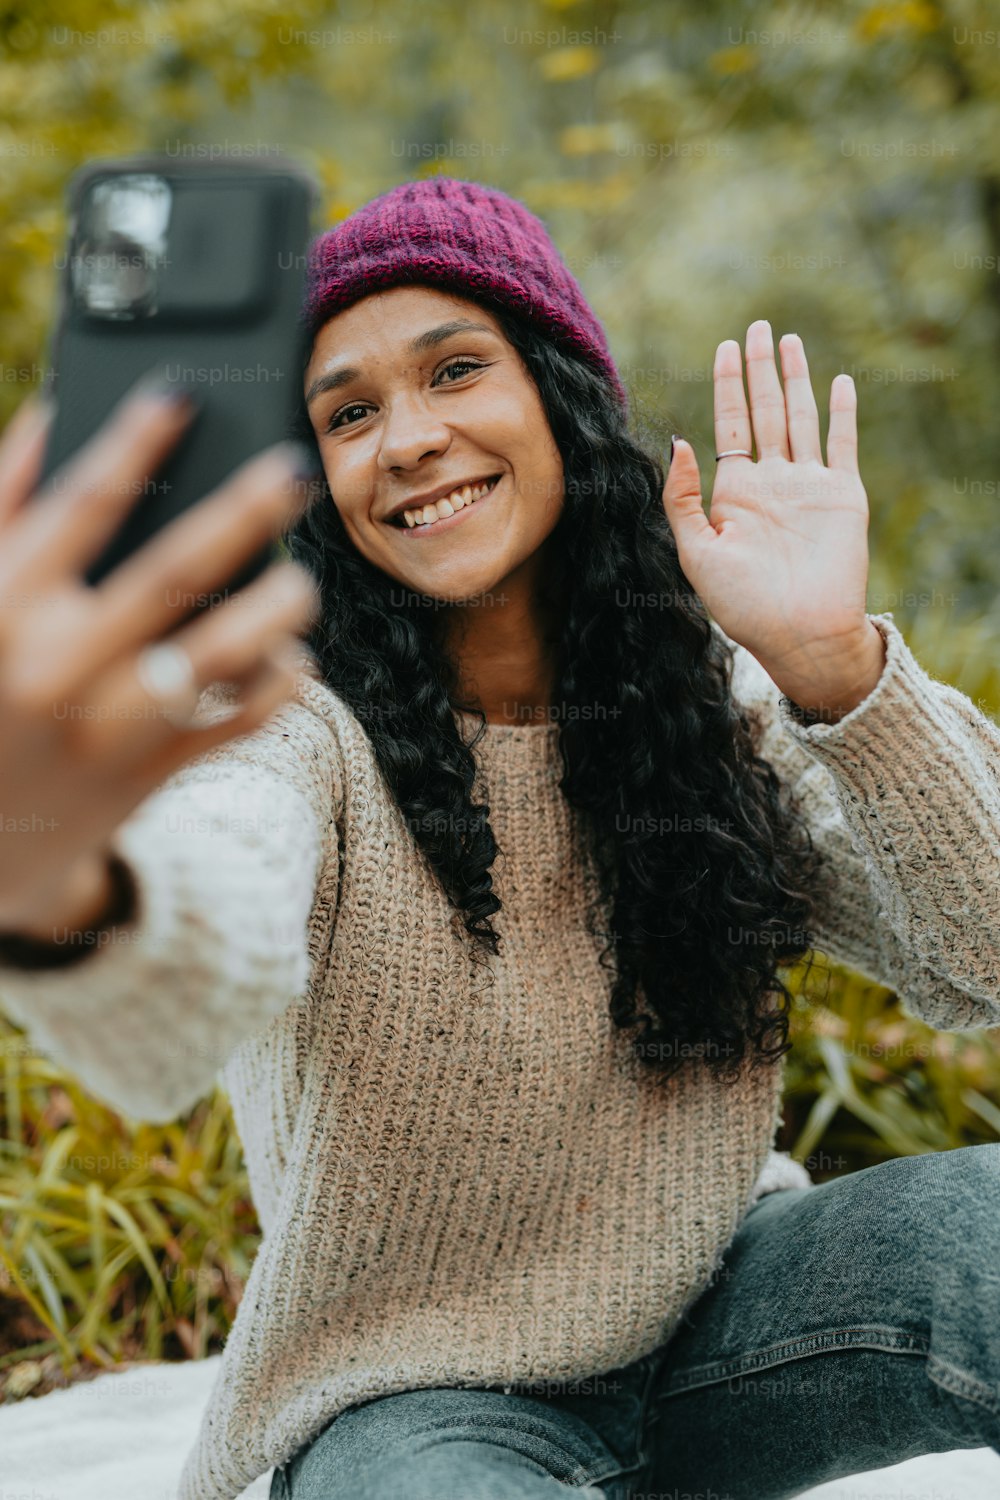 a woman sitting on the ground taking a picture with her phone